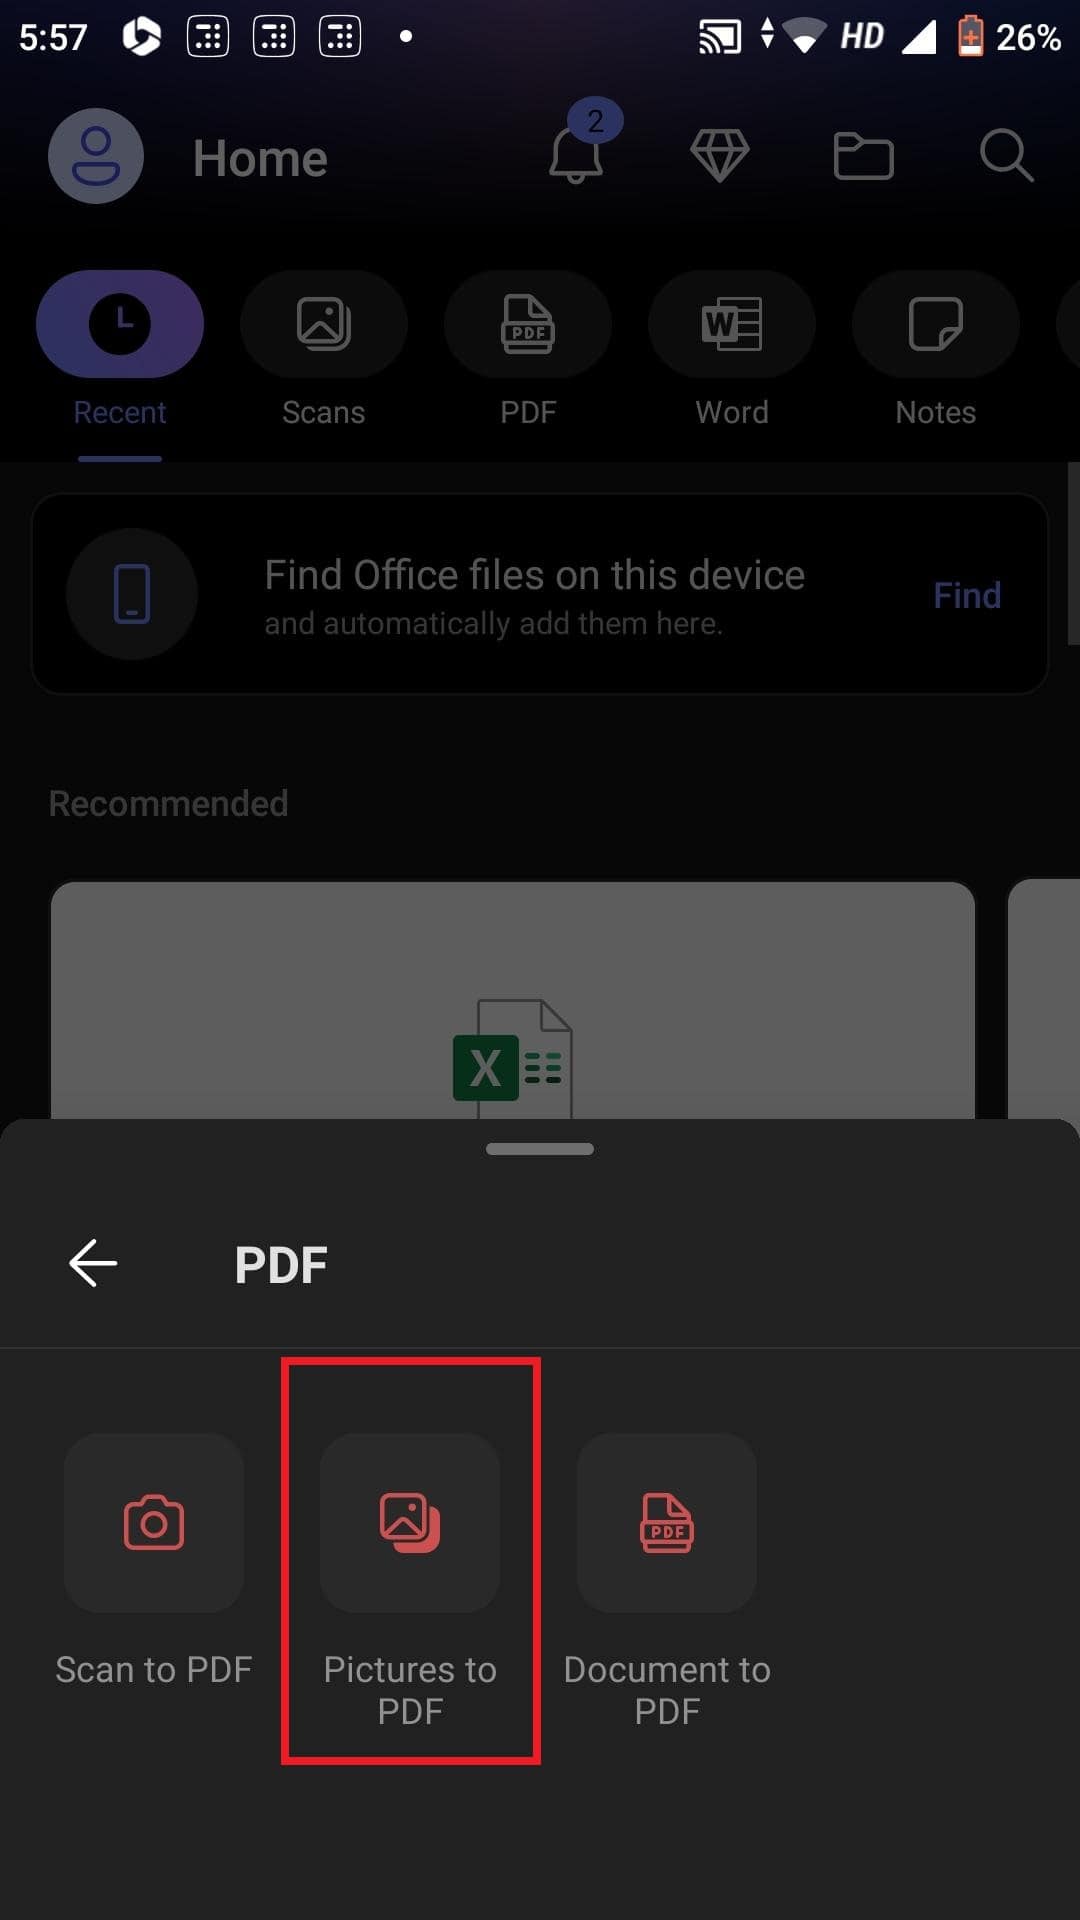 Select "PDF" then "picture to pdf" and choose the image(s) you want to convert.